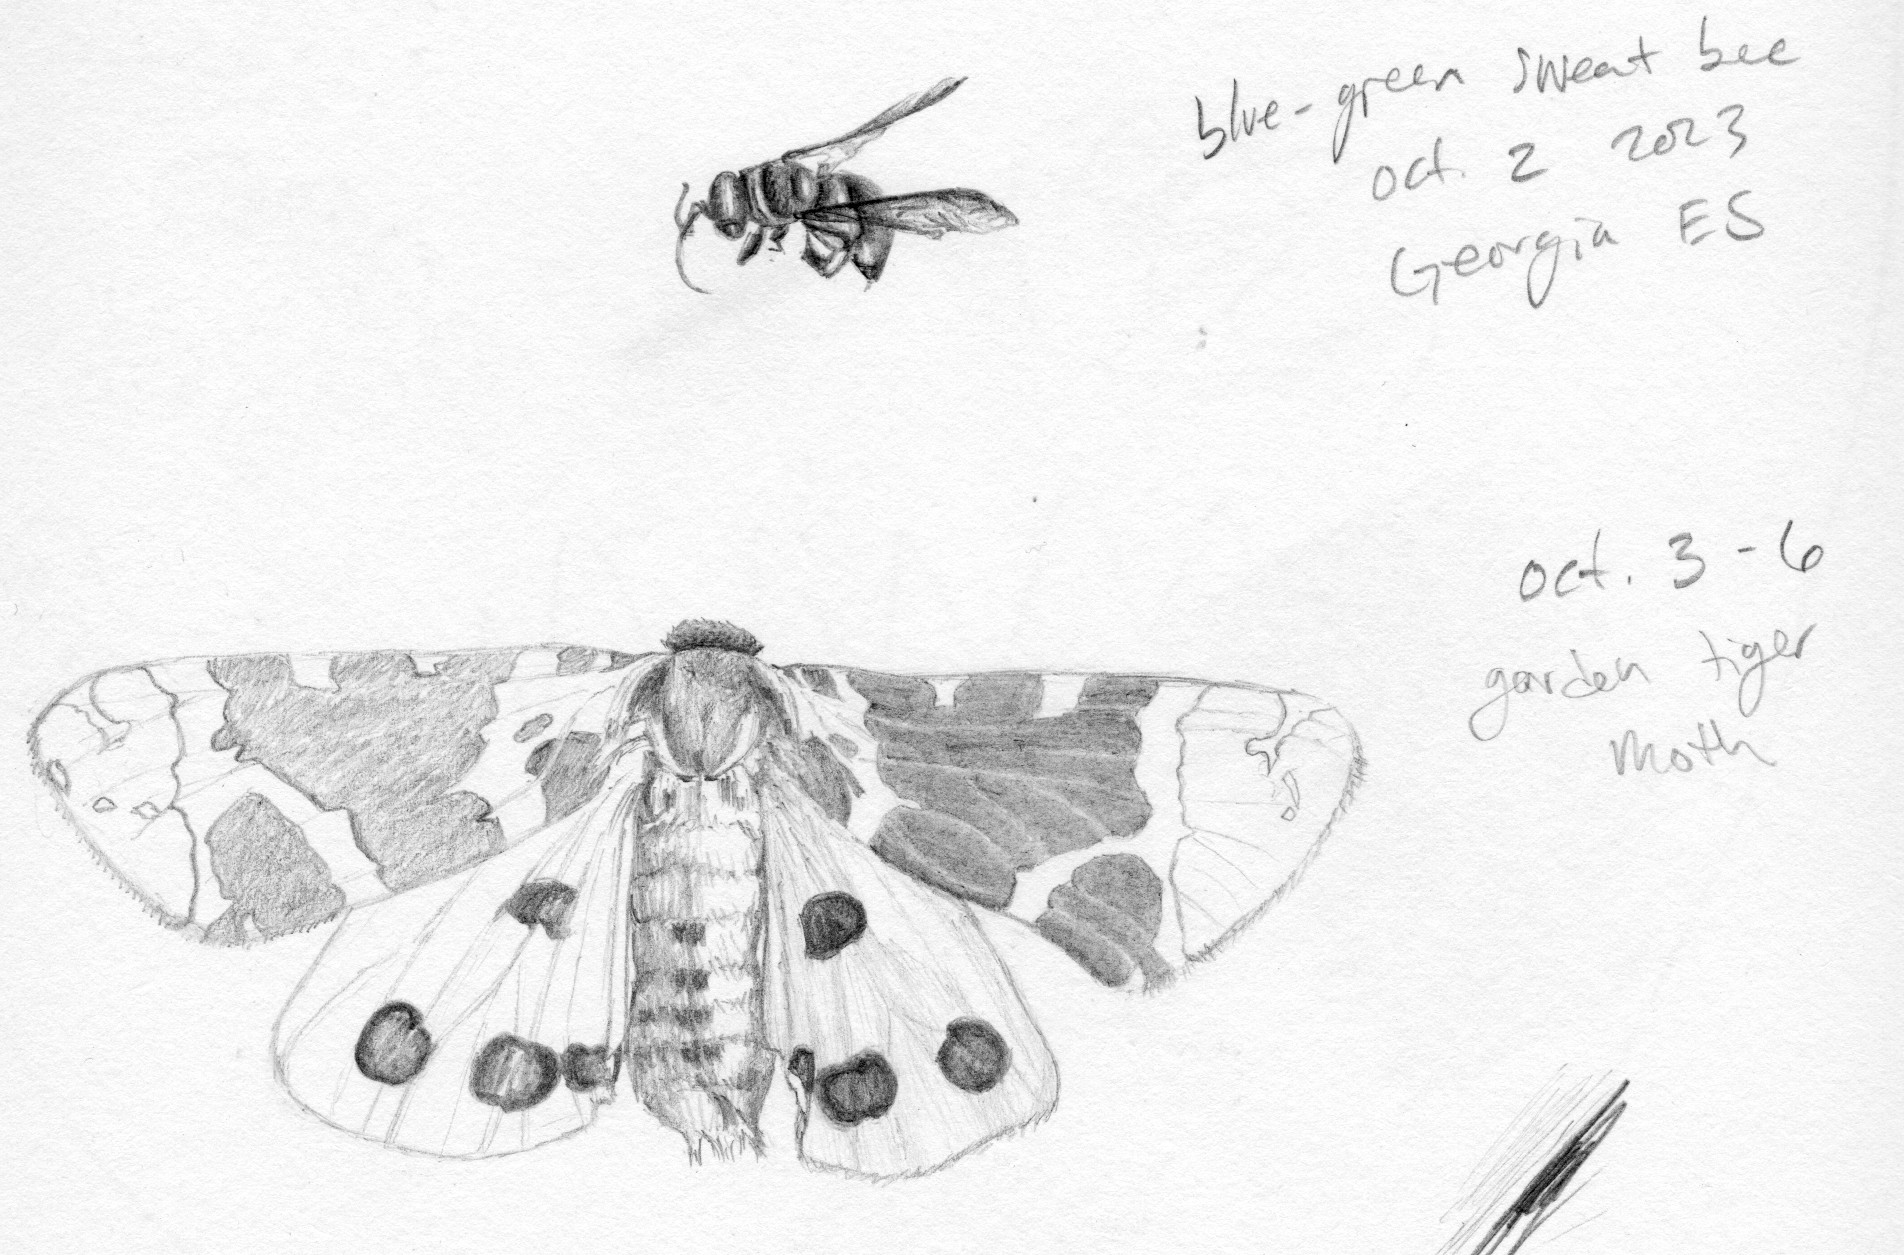 Example pencil drawings from my sketch book of insects from my collection. Drawn while teaching elementary students.